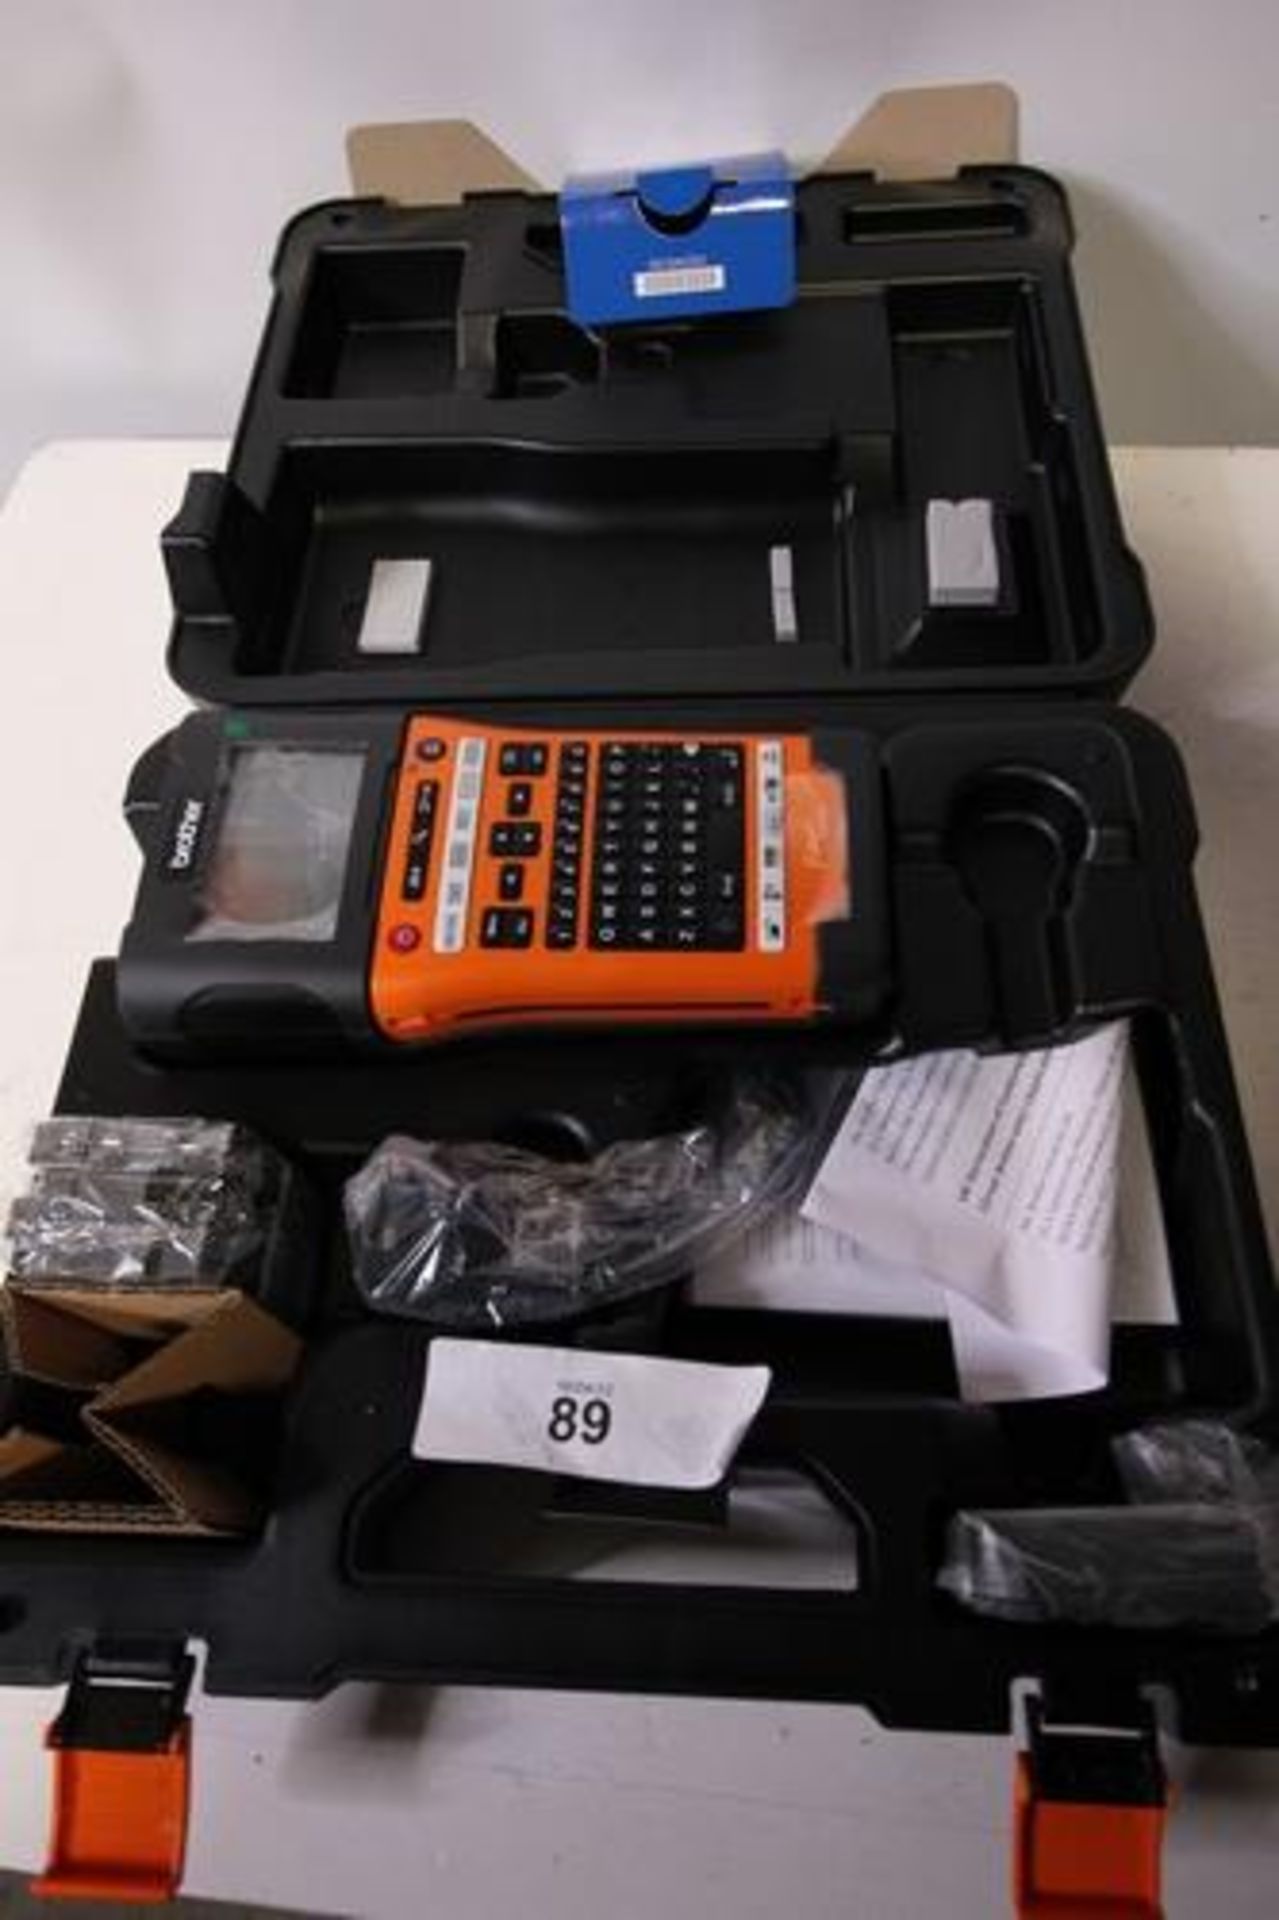 1 x Brother P-Touch E550 WNIVP label printer, code 3134320001 - New in box (SW6) - Image 2 of 3